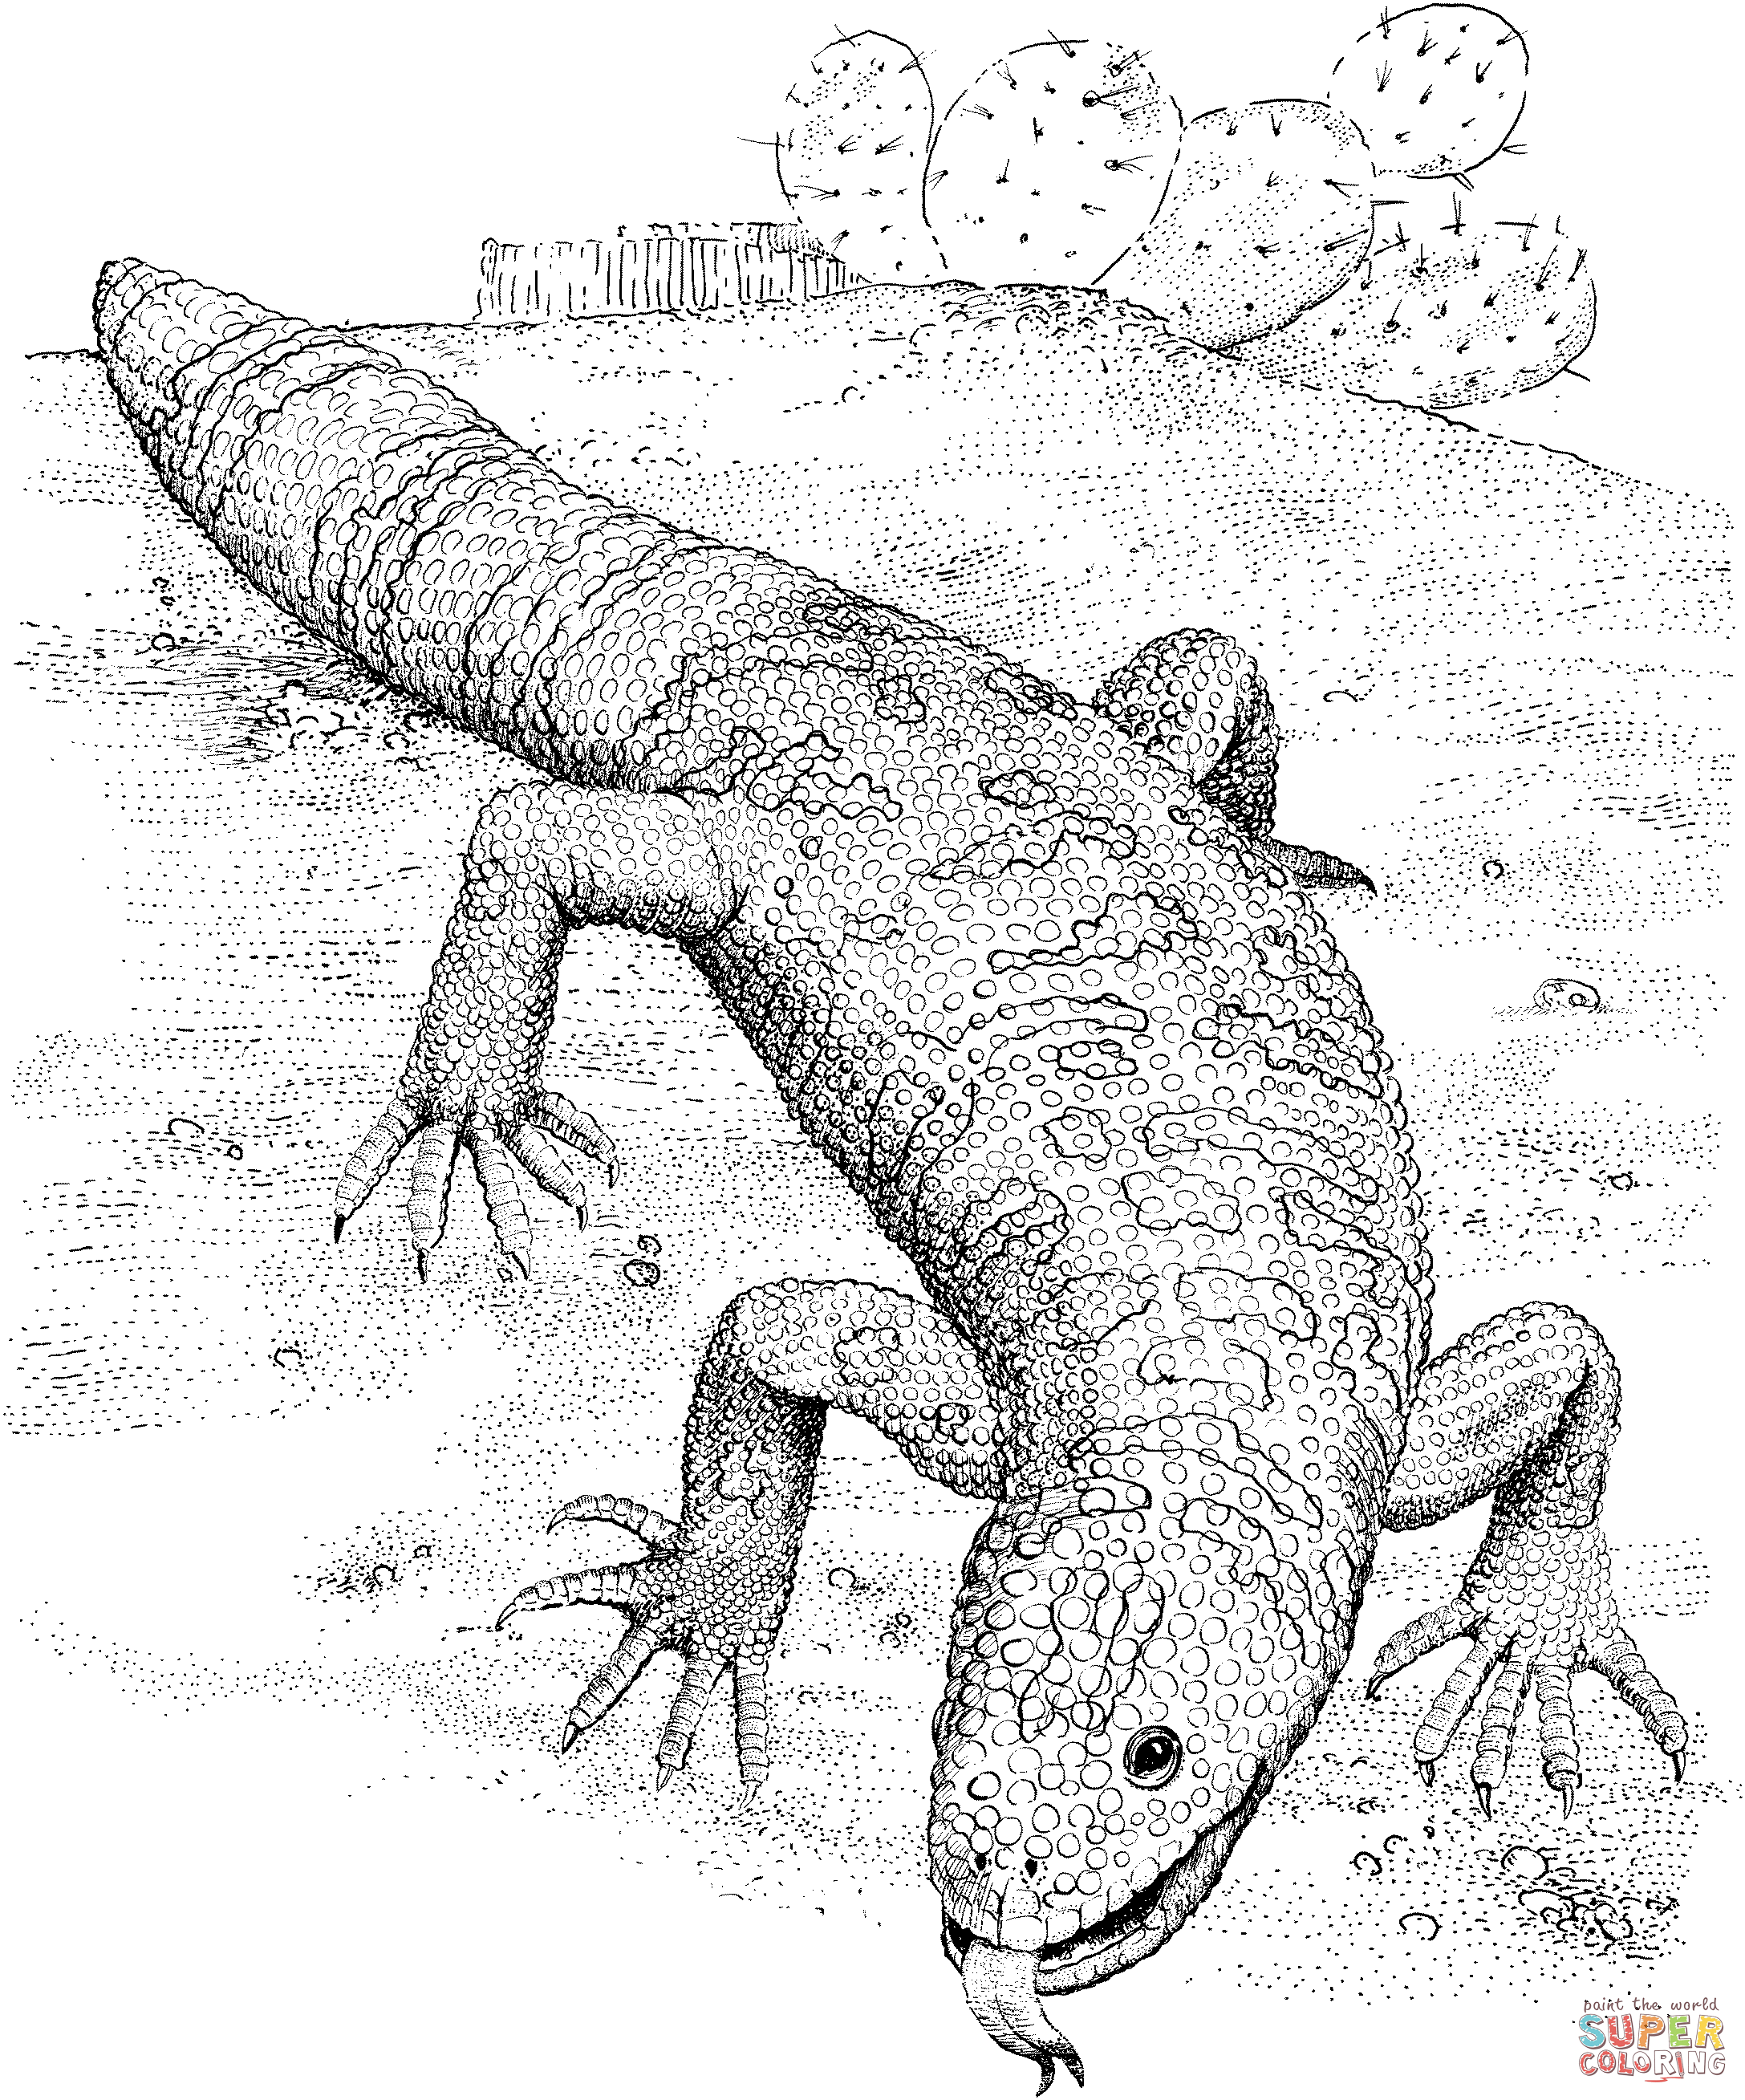 Gila Monster coloring page | Free Printable Coloring Pages